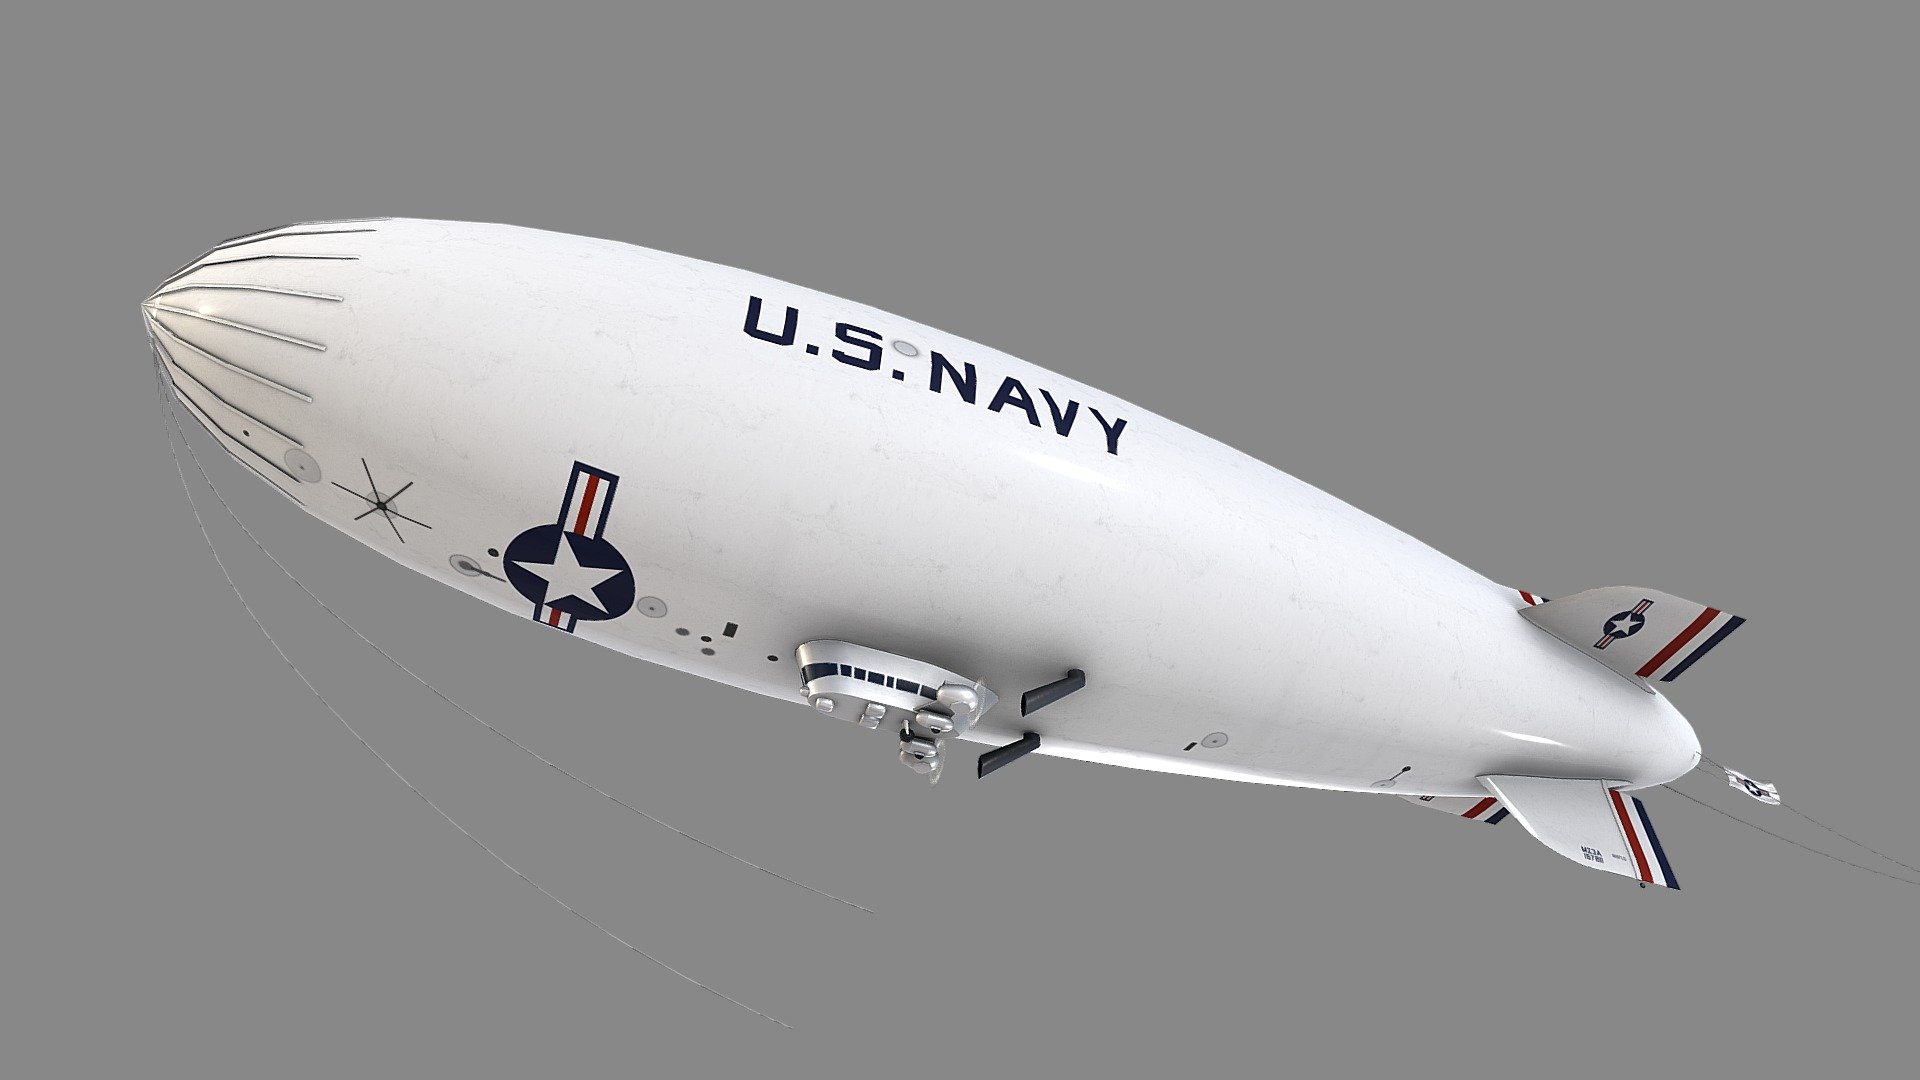 Low Poly Airship Blimp - US Navy 2 Livery

Part of collection:




https://skfb.ly/oUnoY

Details:




Game ready, PBR ready, realtime optimized

Included are 2 animated model versions with 180 frames @ 30 fps

FBX export contains pure rotation based animations, that work best with the Sketchfab viewer

3dsMax file contains also an extended animated version with modifiers

Static model version included as well

Made in real world scale meters

Non-overlapping unwrapped on 1 UV layout

Ideal as good quality background object

PBR textures:




12 x both PBR workflows ready textures in native 4K

Propellers got 512x512 textures resolution

Triangle count:




Complete 4.020 tris
 - Low Poly Airship Blimp - US Navy 2 Livery - Buy Royalty Free 3D model by 3dgtx 3d model